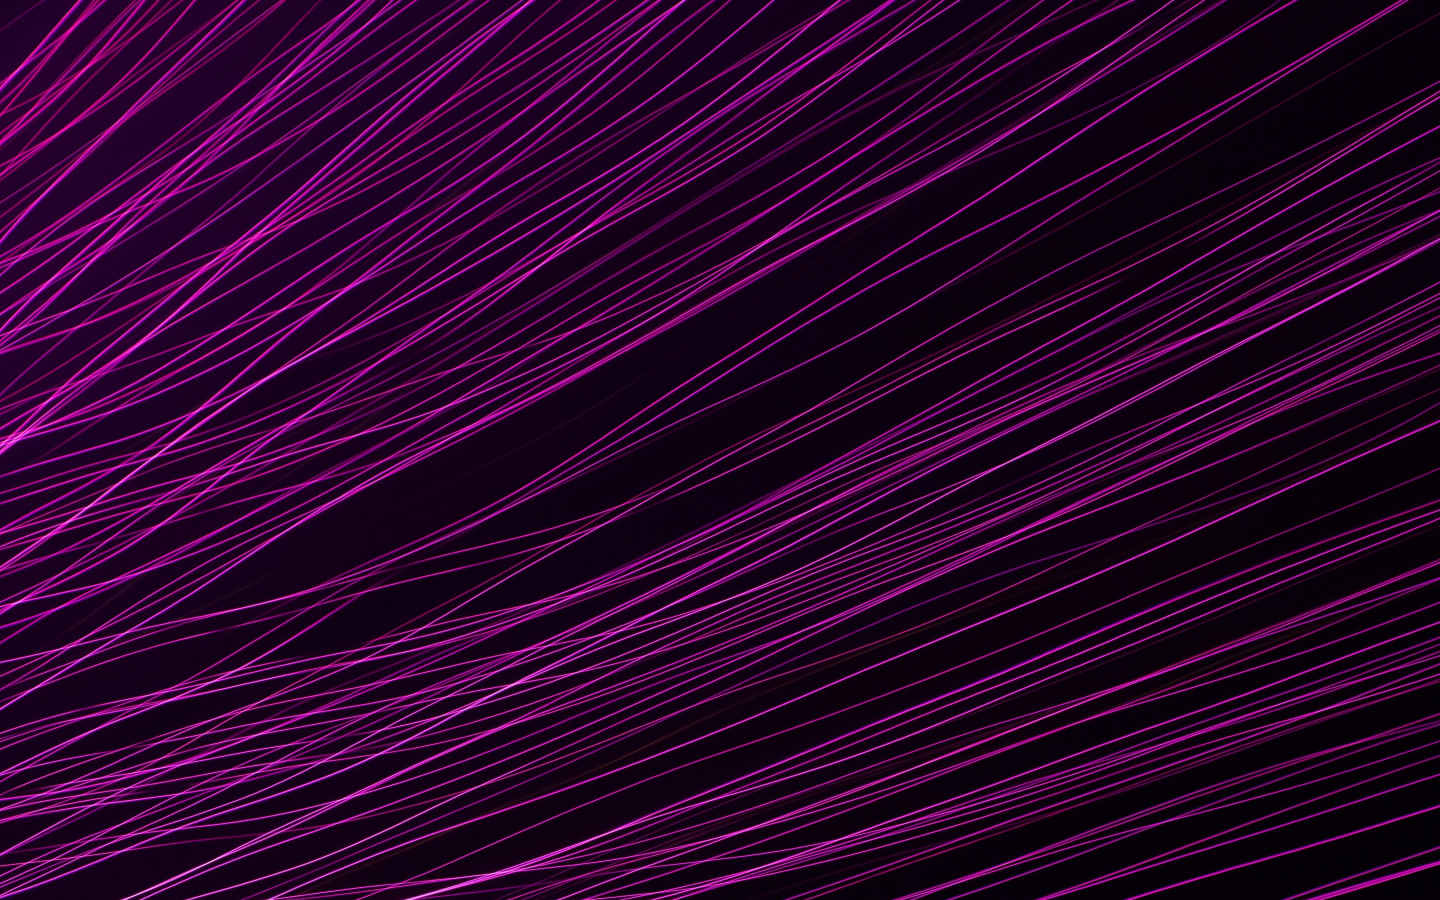 Download wallpaper 1440x900 abstraction, pink threads, 1440x900 ...